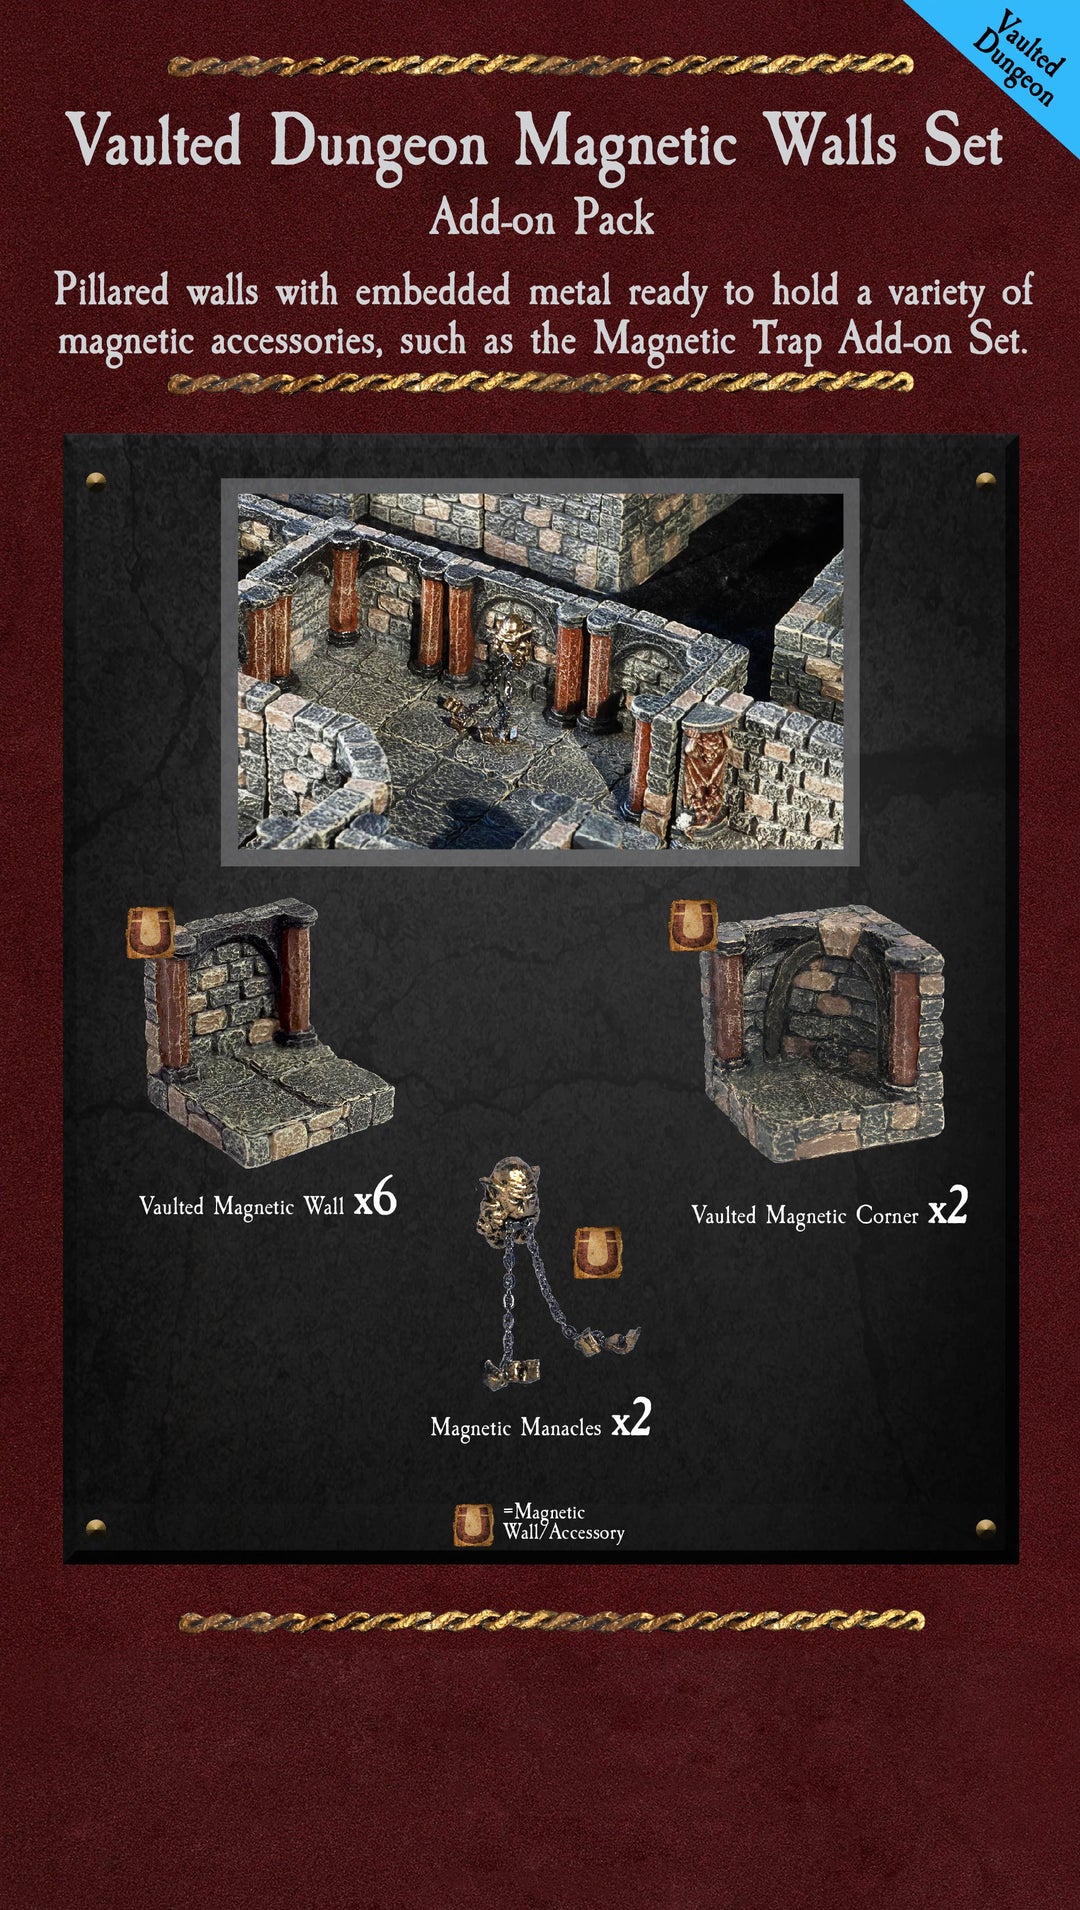 Vaulted Dungeon Magnetic Walls - Painted